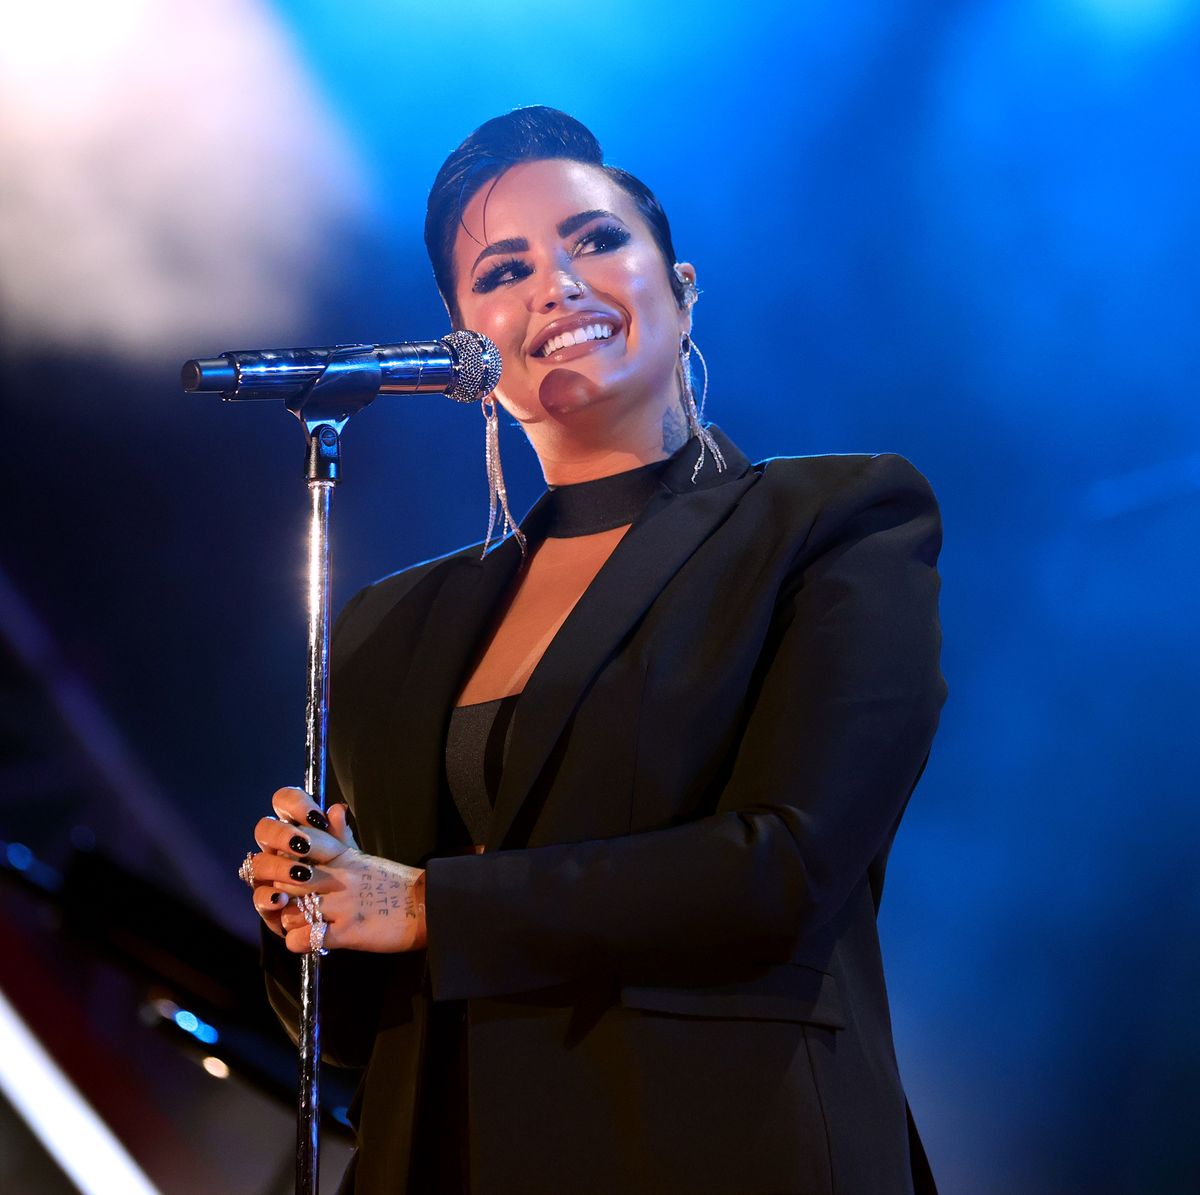 https://hips.hearstapps.com/hmg-prod/images/demi-lovato-performs-onstage-during-global-citizen-live-on-news-photo-1690831390.jpg?crop=0.668xw:1.00xh;0.165xw,0&resize=1200:*